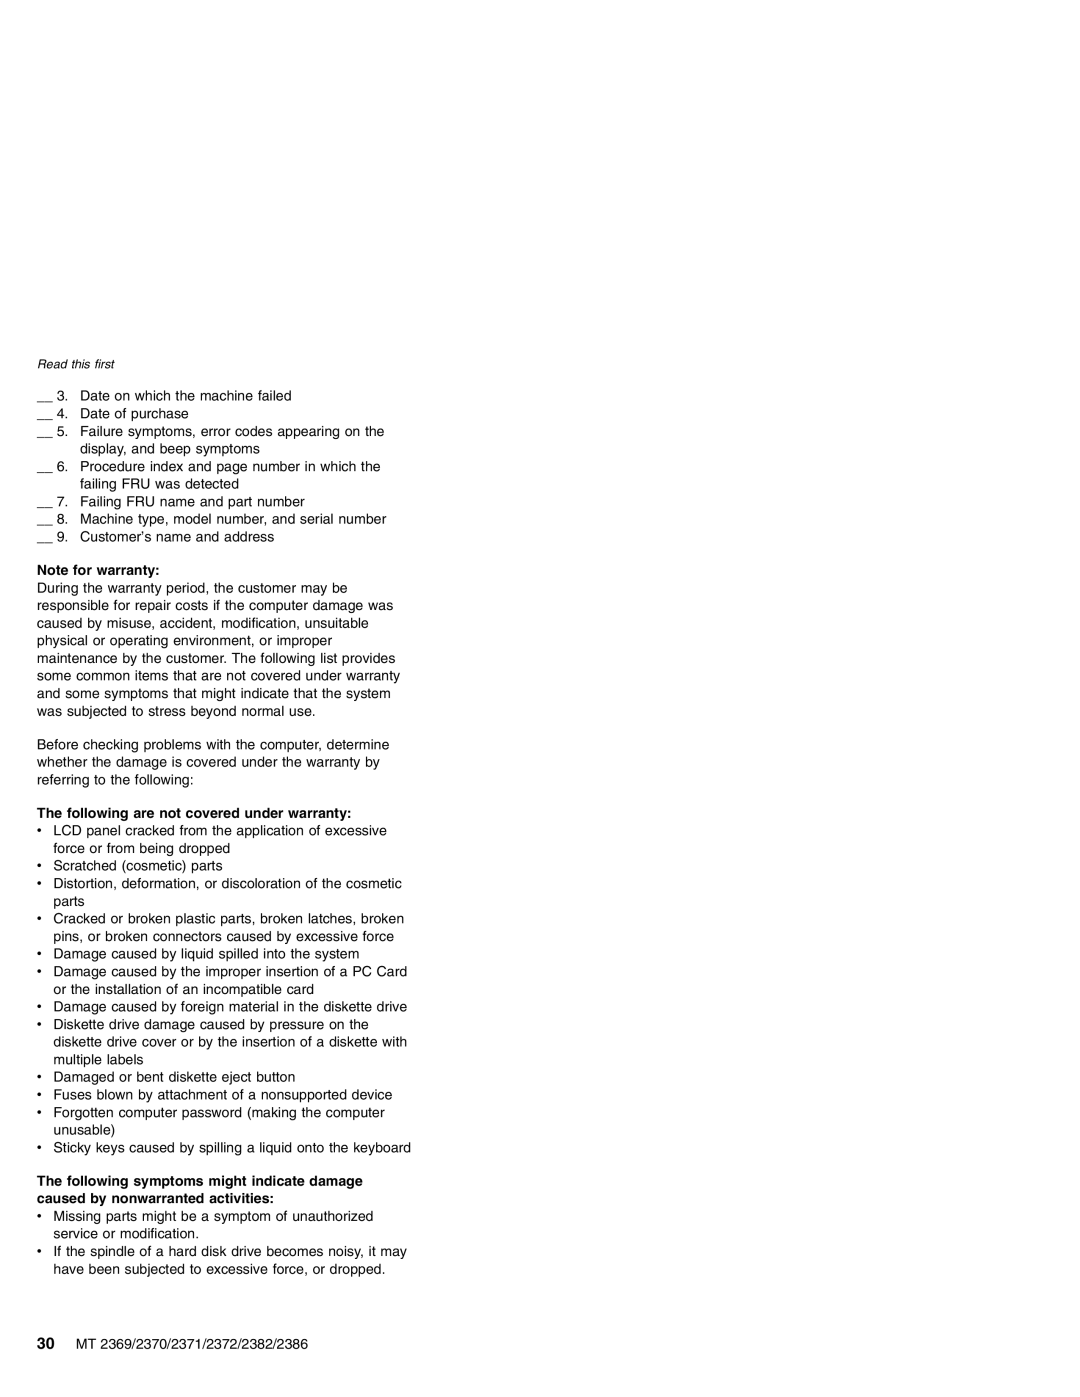 Lenovo MT 2369 manual Note for warranty, The following are not covered under warranty 